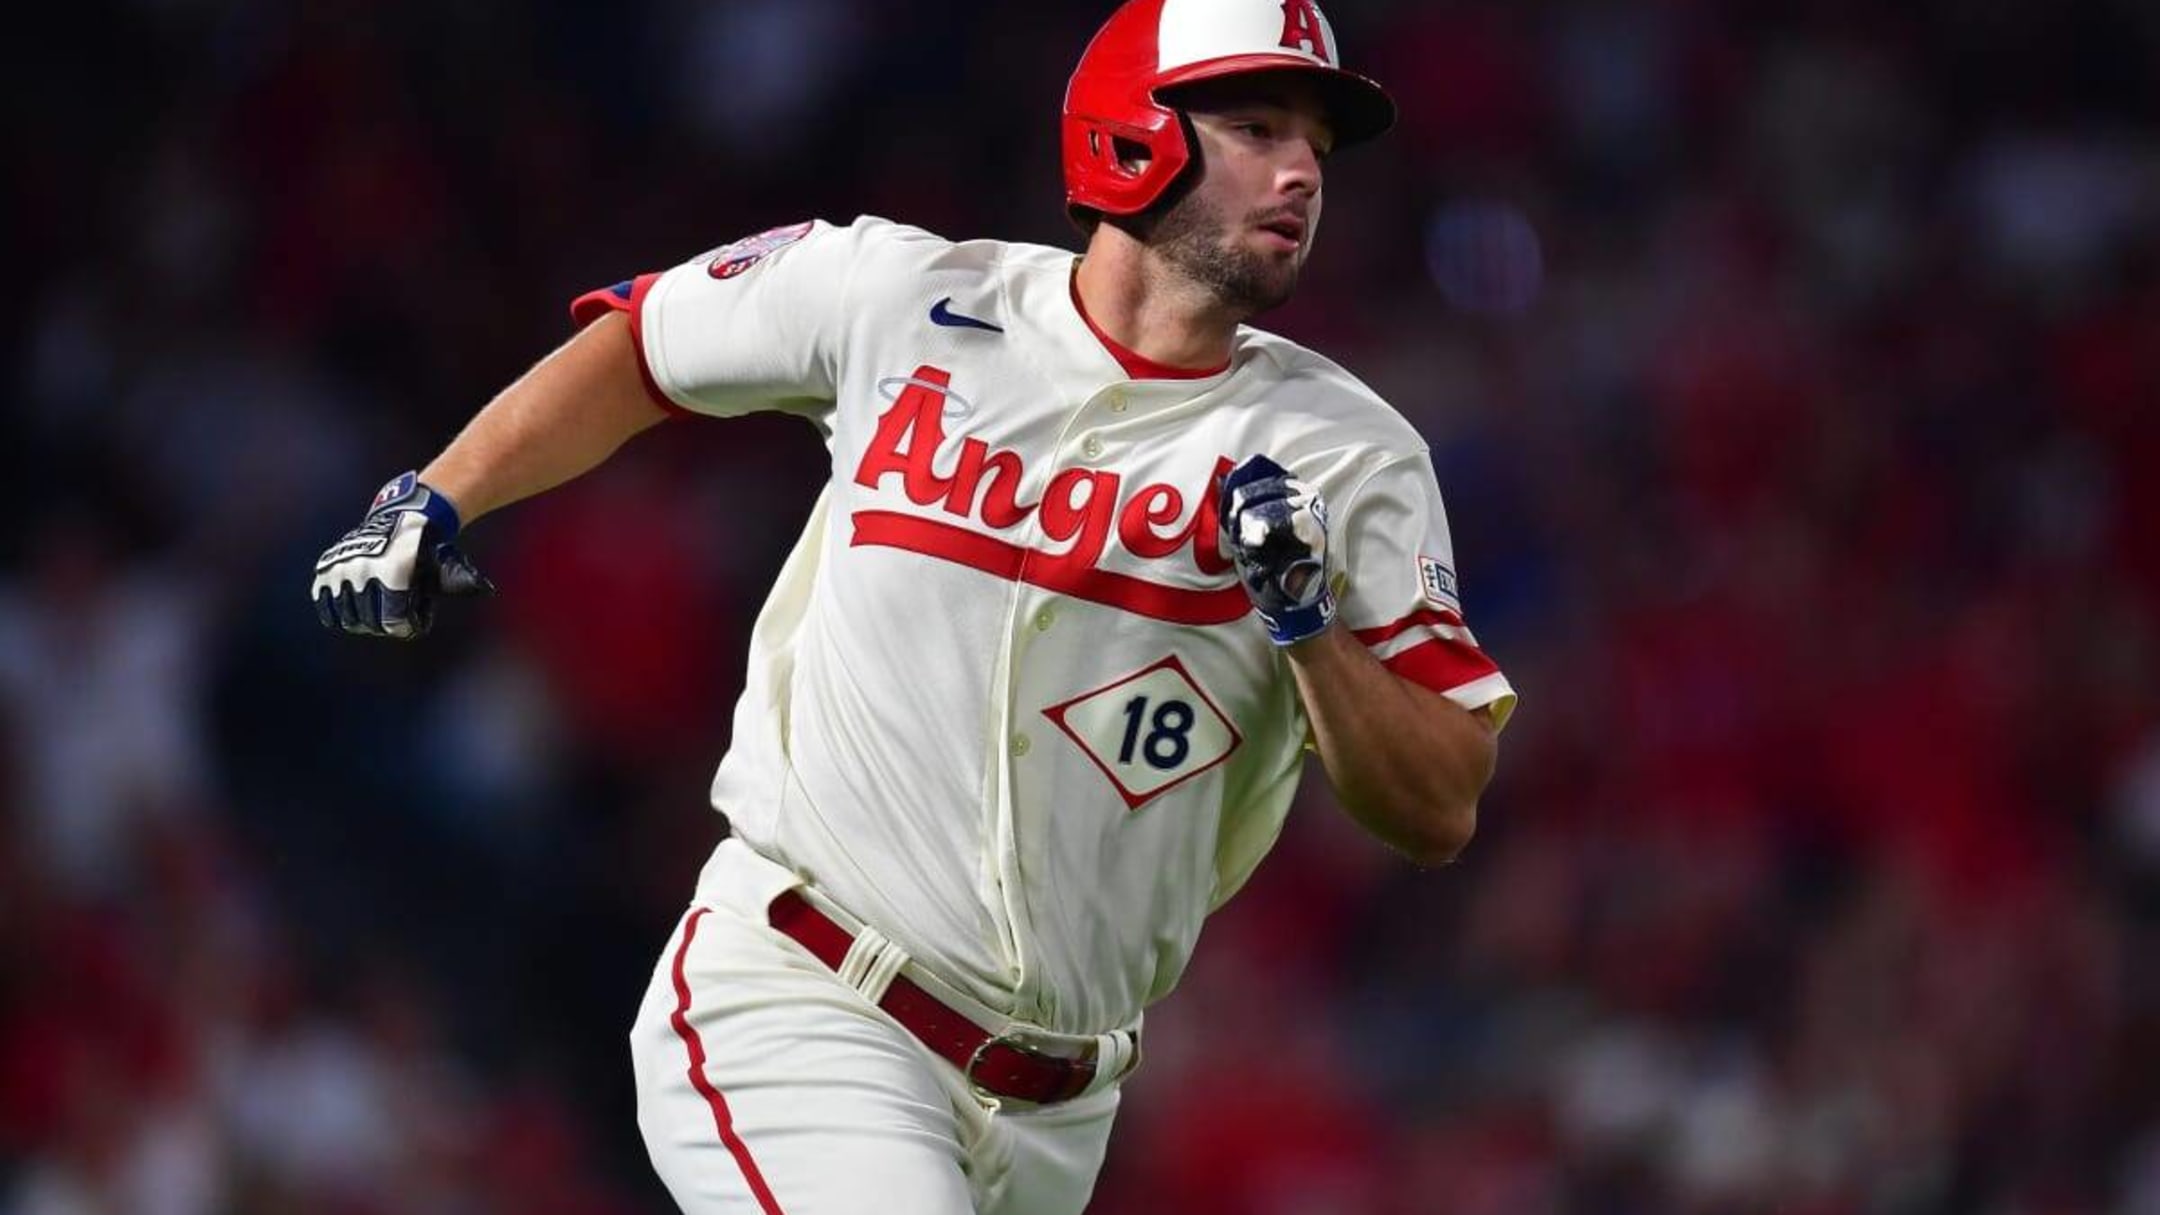 Los Angeles Angels Rookie Starting Career Off on Historic Note